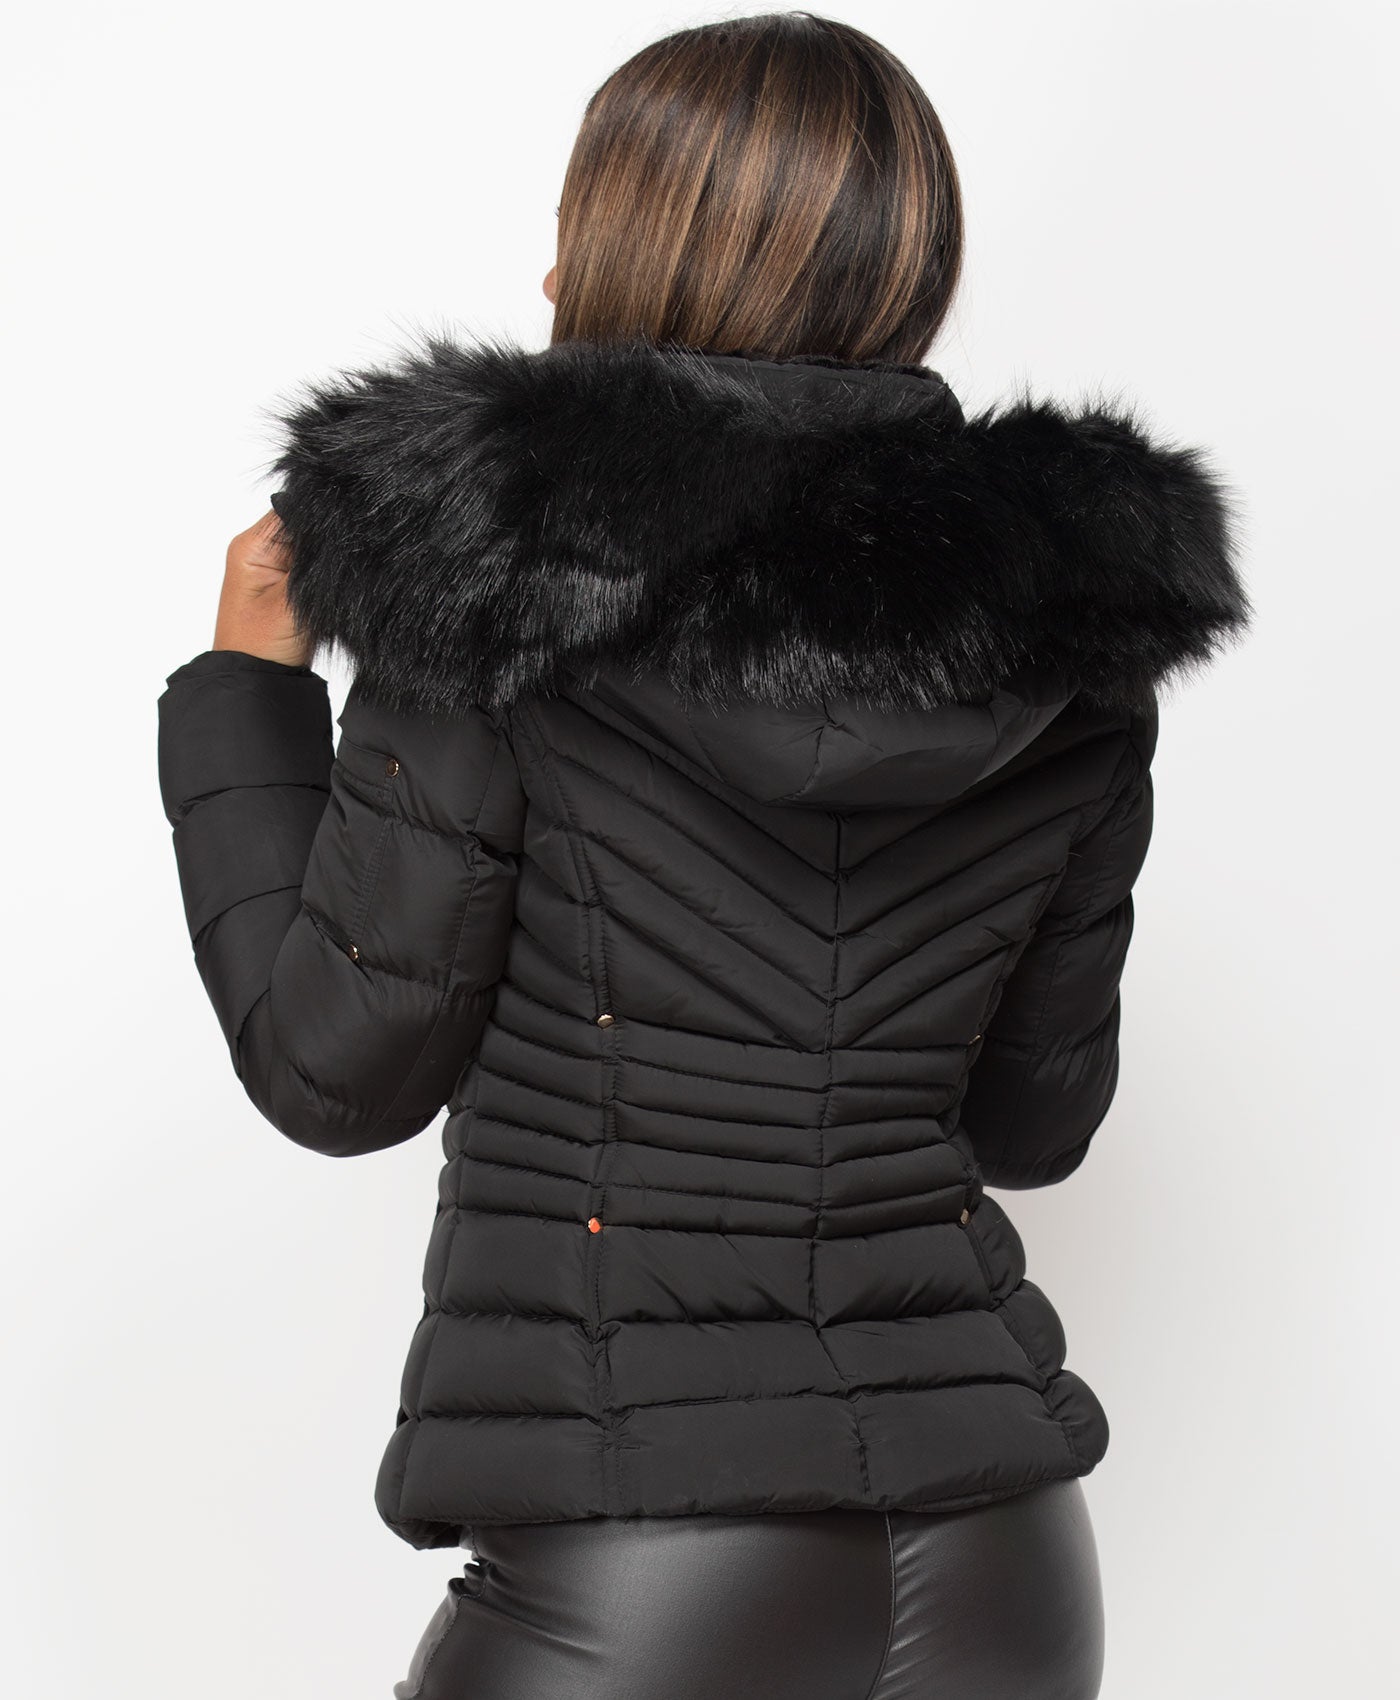 Black-Y-958-Padded-Quilted-Faux-Fur-Hooded-Jacket-3